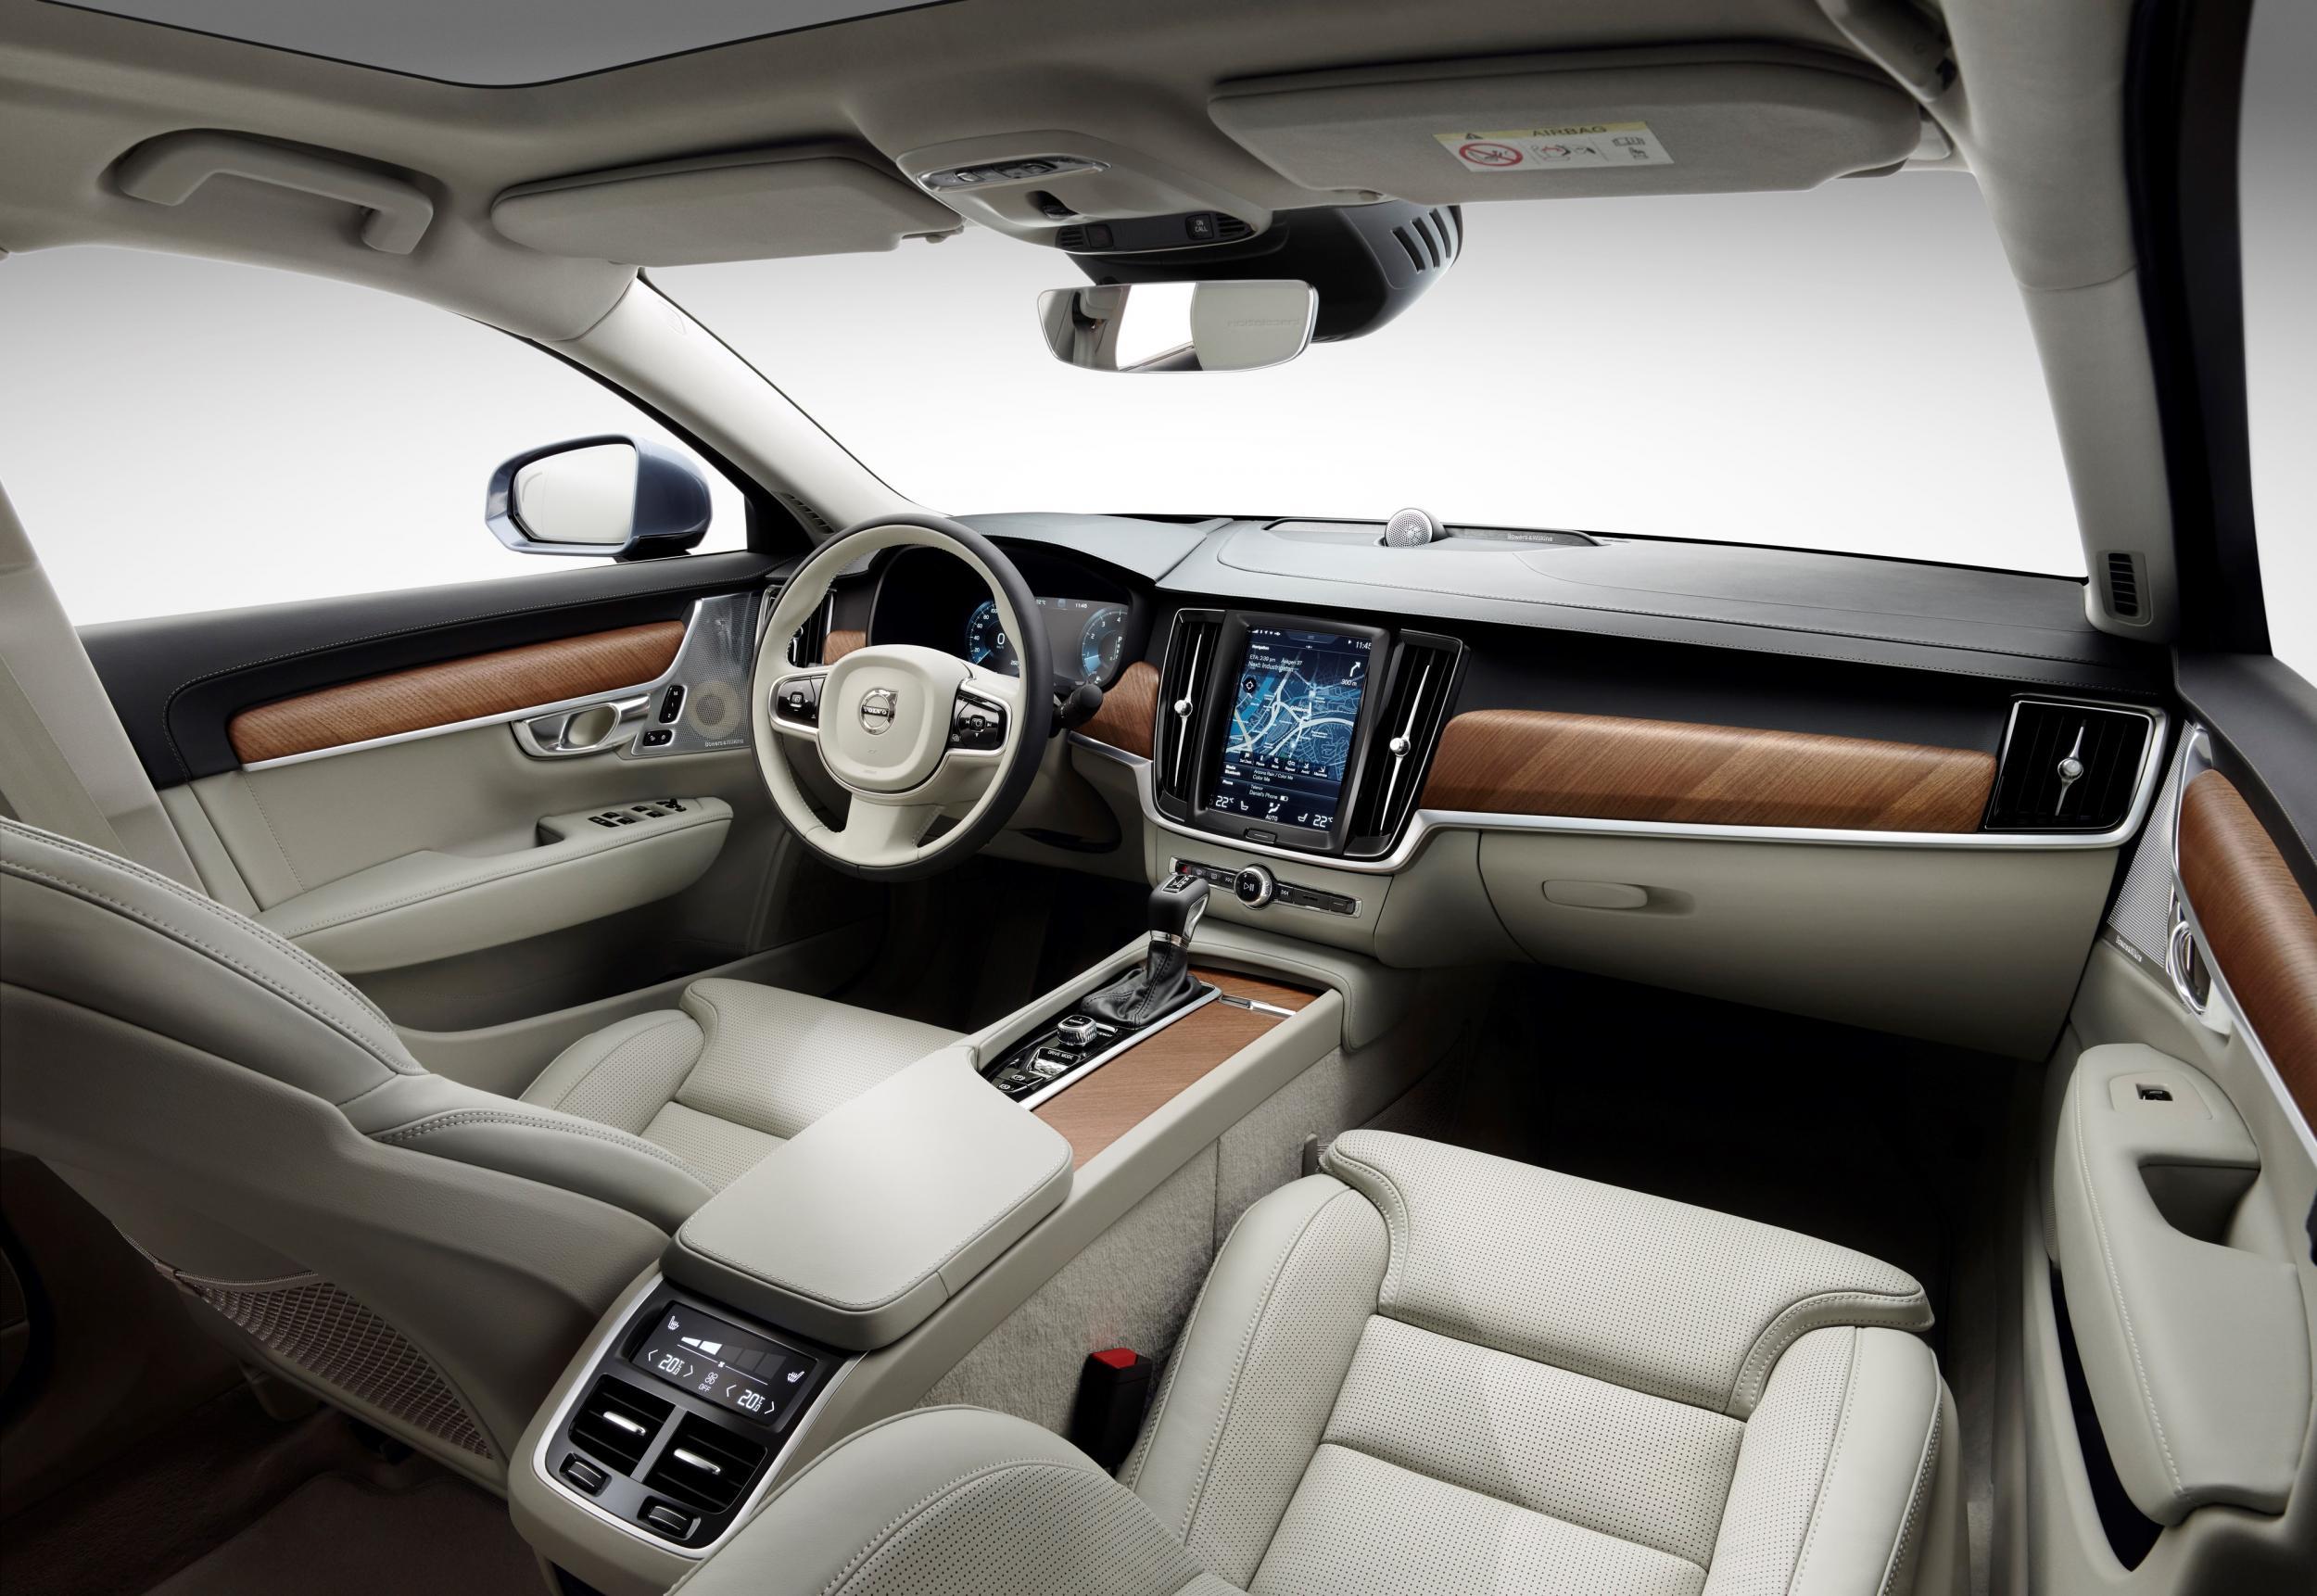 The S90’s roomy cabin is comfortable and relaxing